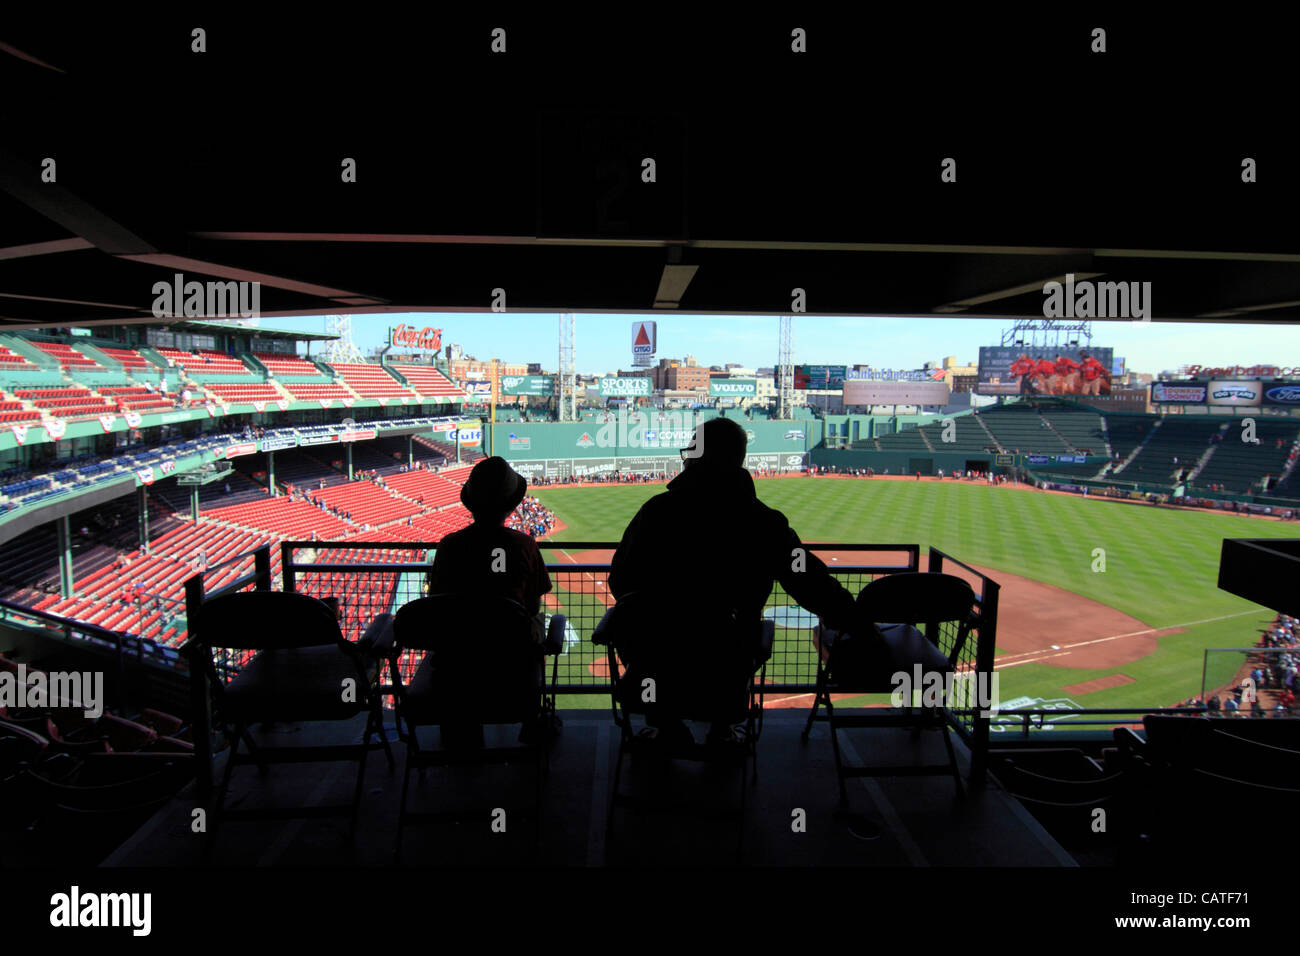 Boston, Massachusetts, USA. April 19, 2012. Silhouette of a Father and Son sharing a moment alone at Fenway Park on its 100th Anniversary whilst hundreds of Red Sox fans encircle the field to view the dugouts, the green monster and bullpens. Stock Photo